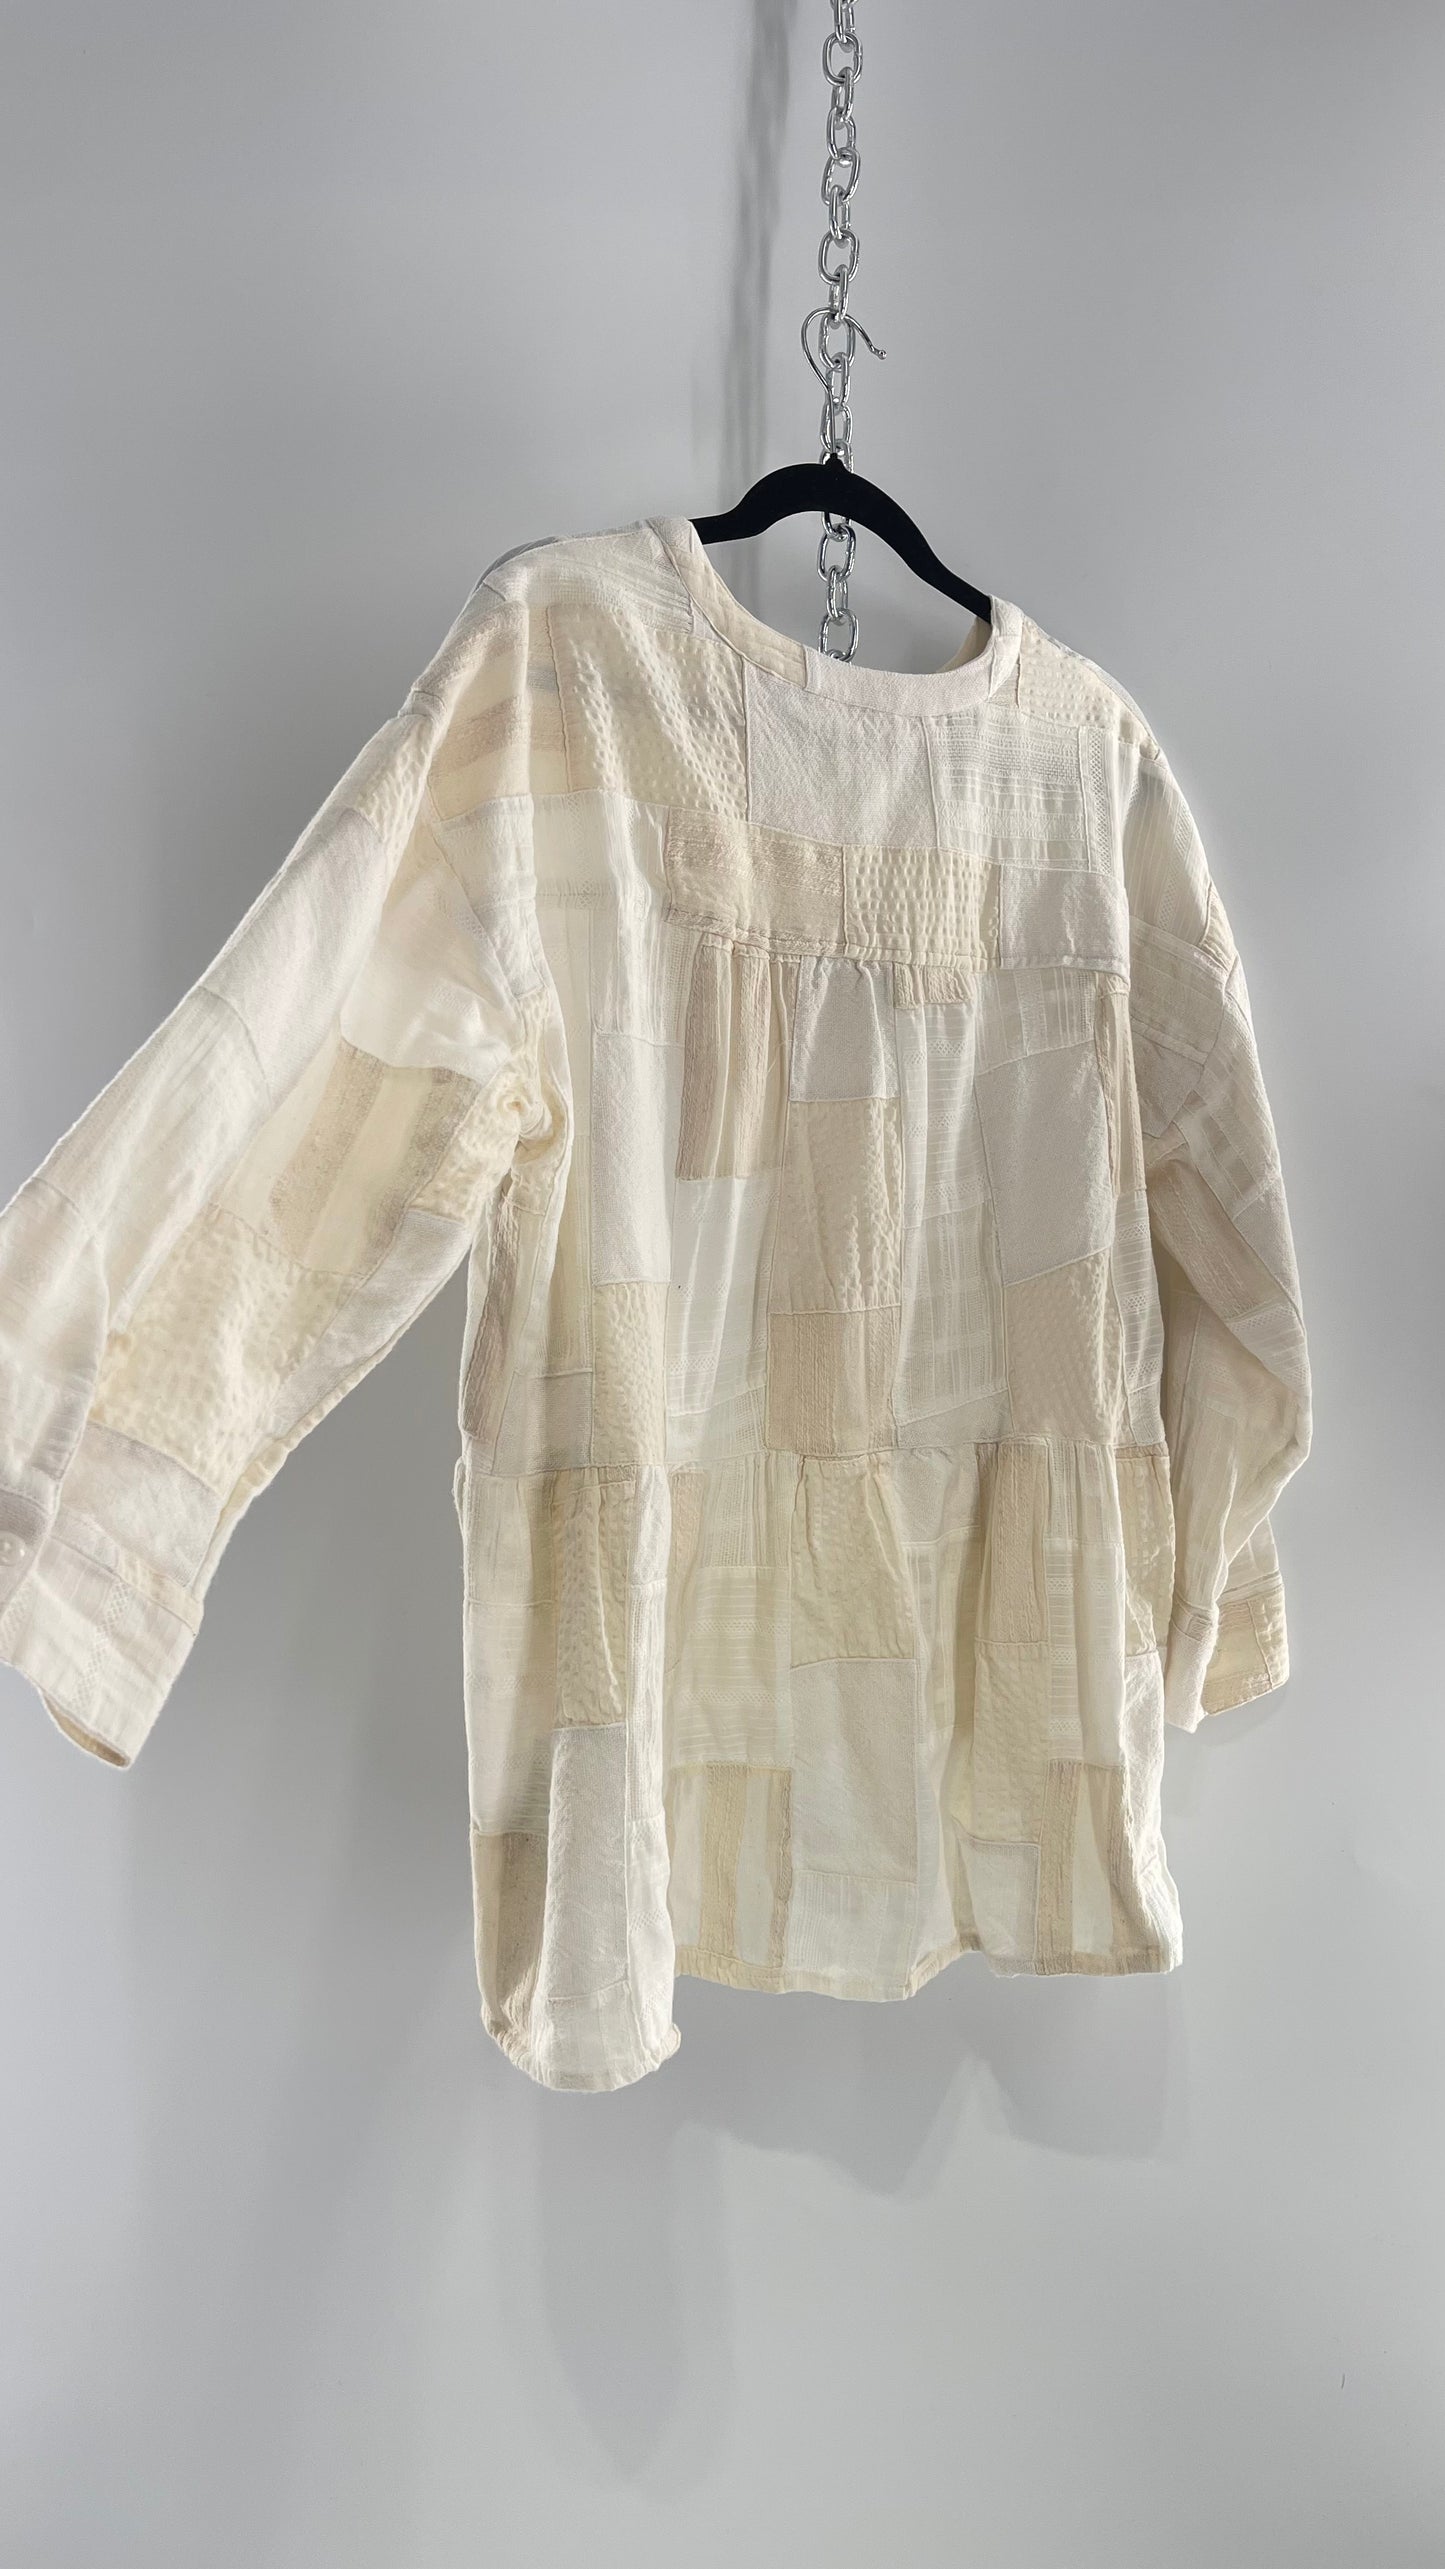 Anthropologie Patchwork Off White Voluminous Blouse with Tags Attached (Small)